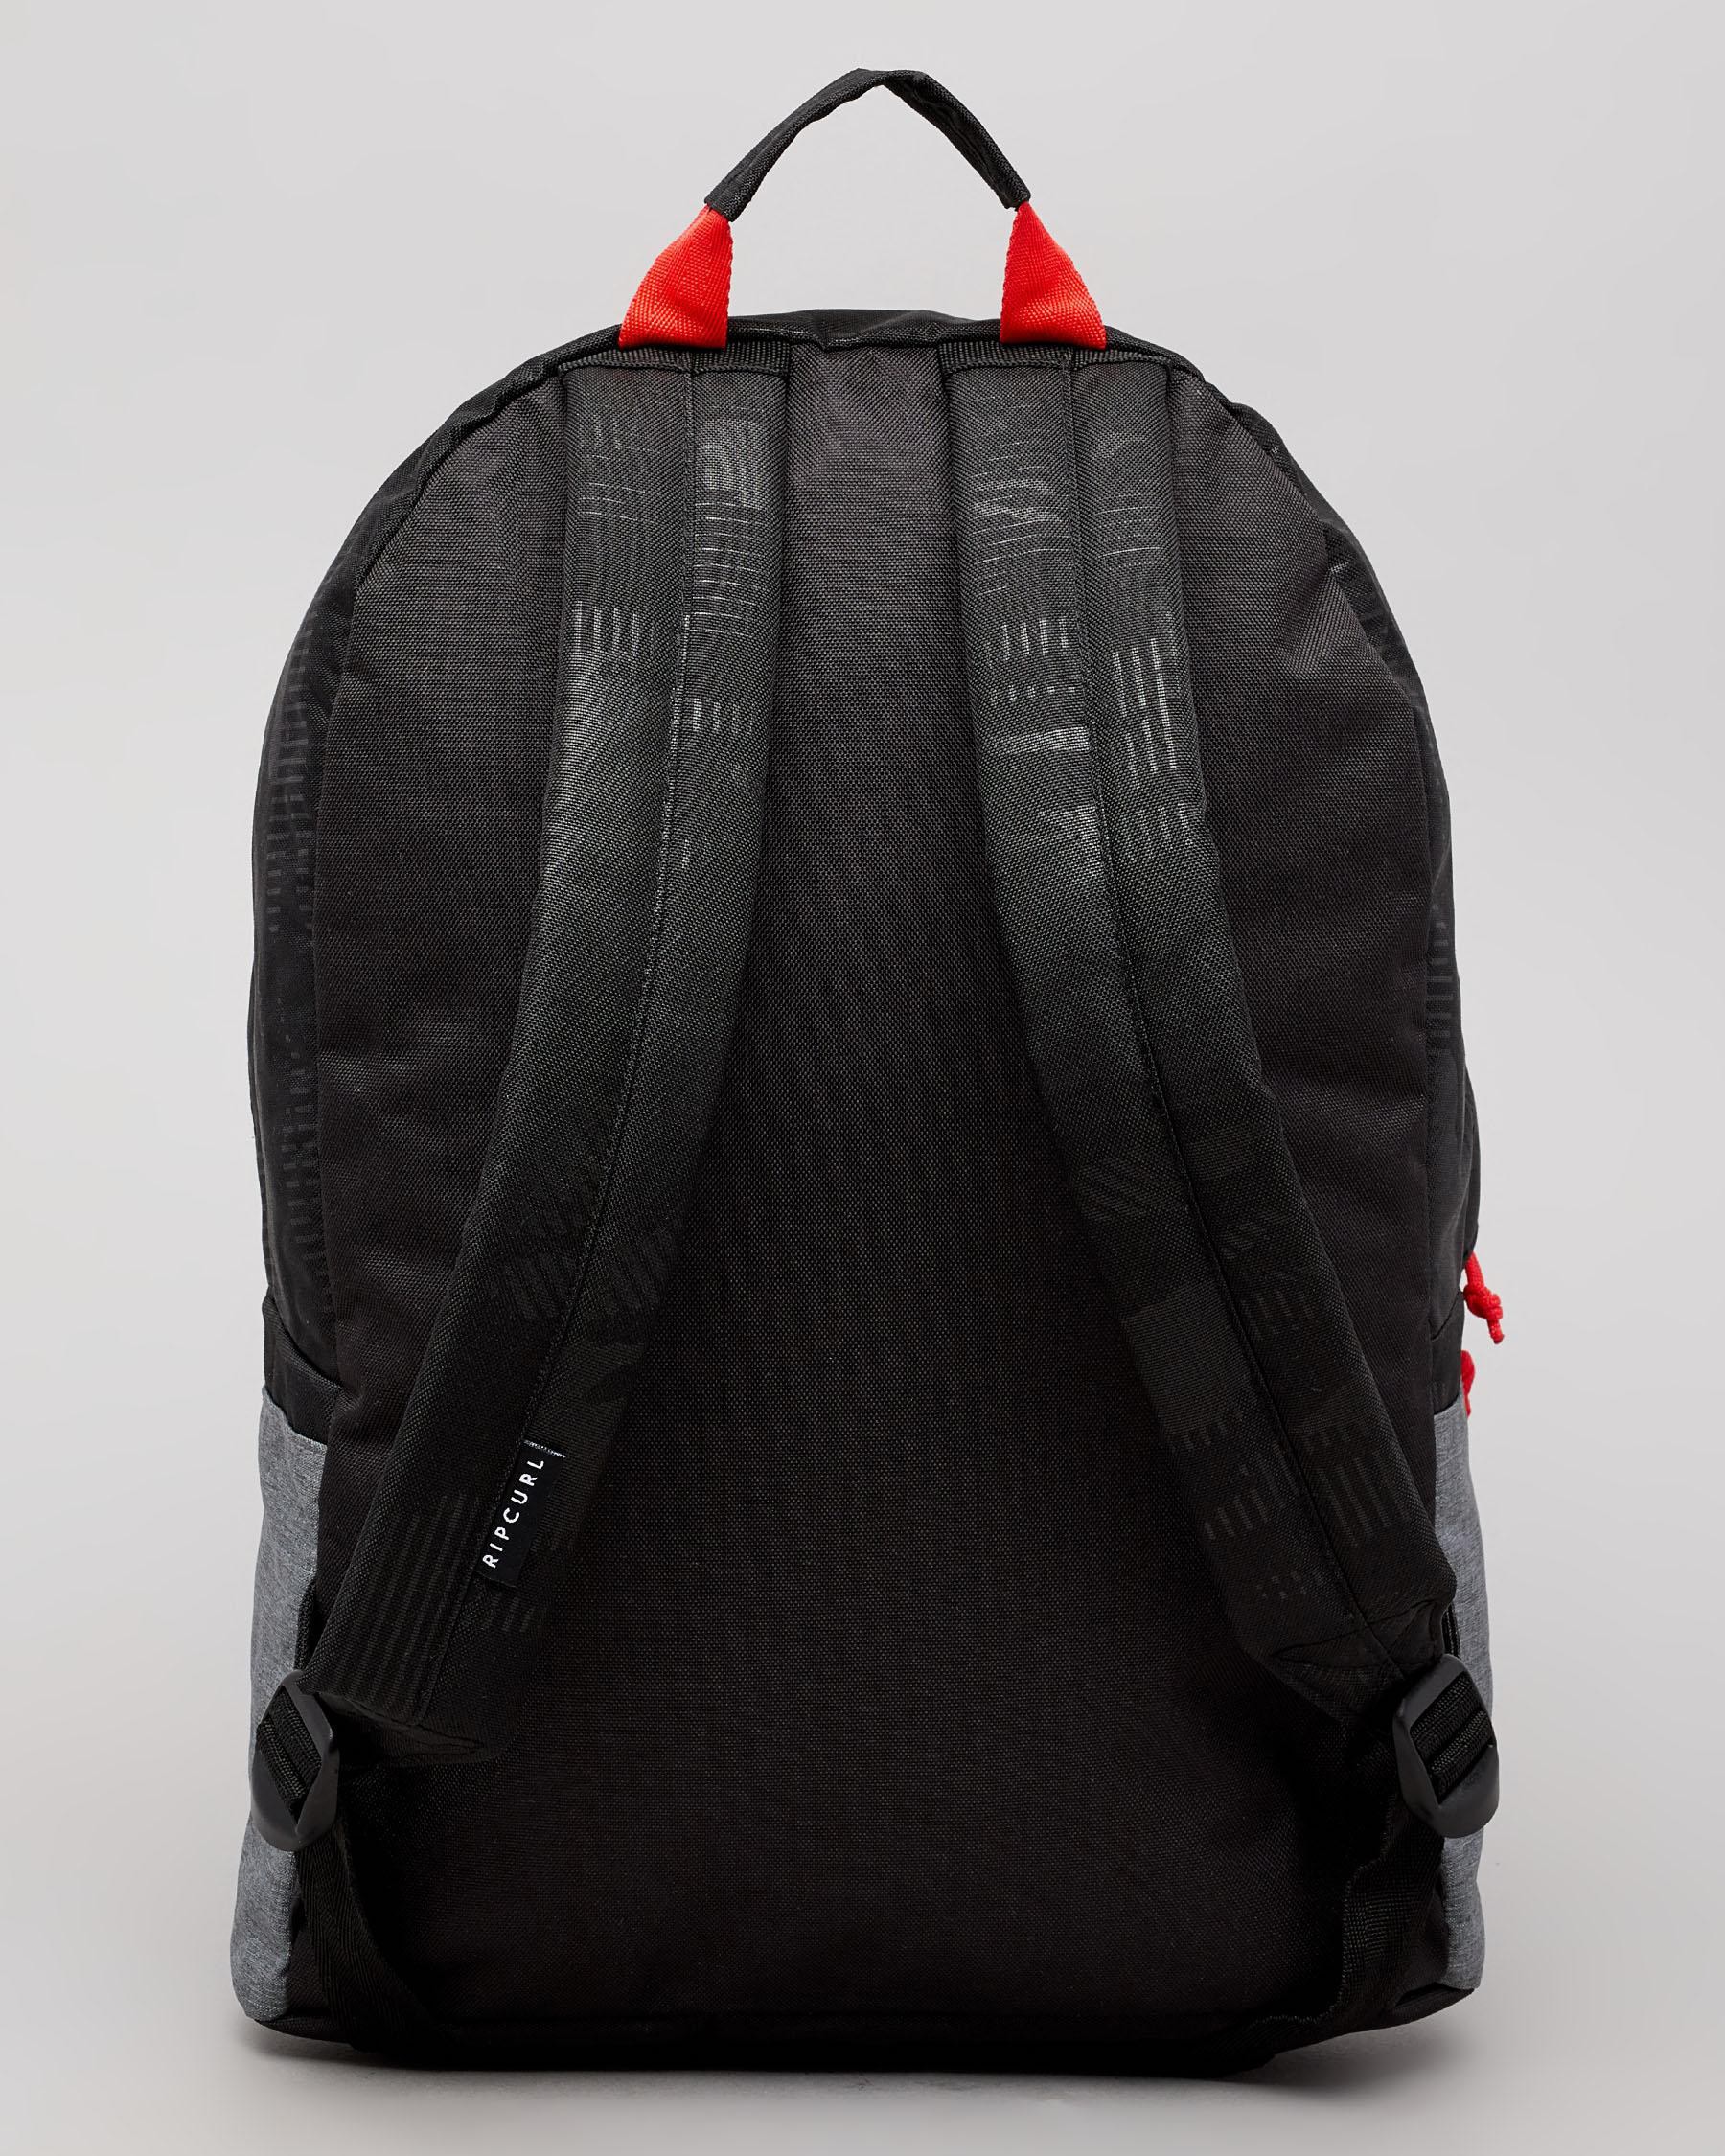 Rip Curl 18L Dome Medina Backpack In Black/red - Fast Shipping & Easy ...